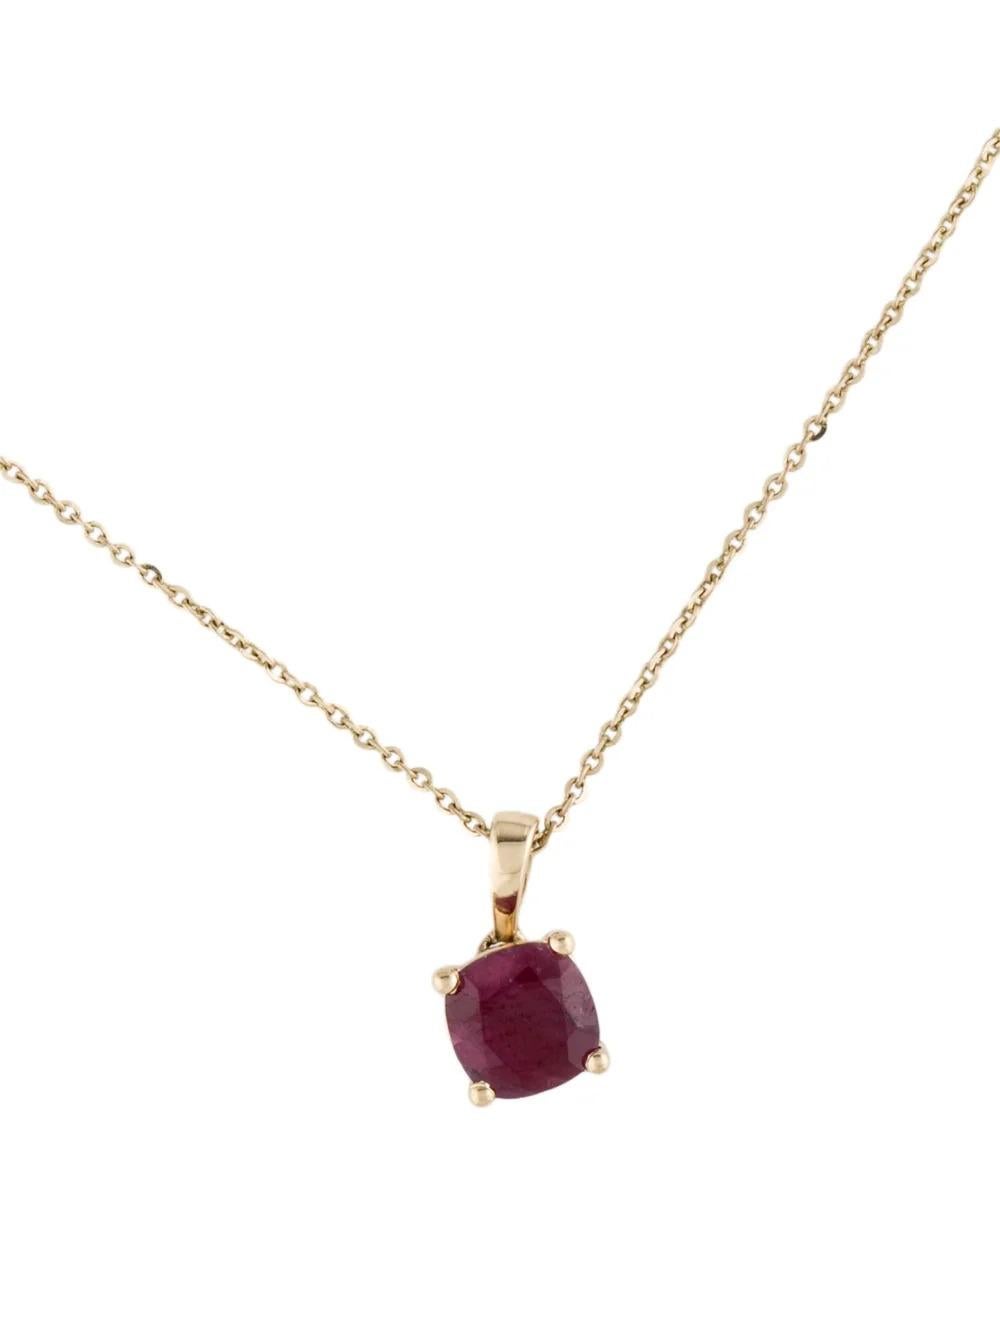 Elevate your style with this stunning 14K Yellow Gold Ruby Pendant Necklace, a timeless piece that exudes sophistication and charm.

DESCRIPTION:
Indulge in luxury with this exquisite 14K Yellow Gold Ruby Pendant Necklace. Crafted to perfection,